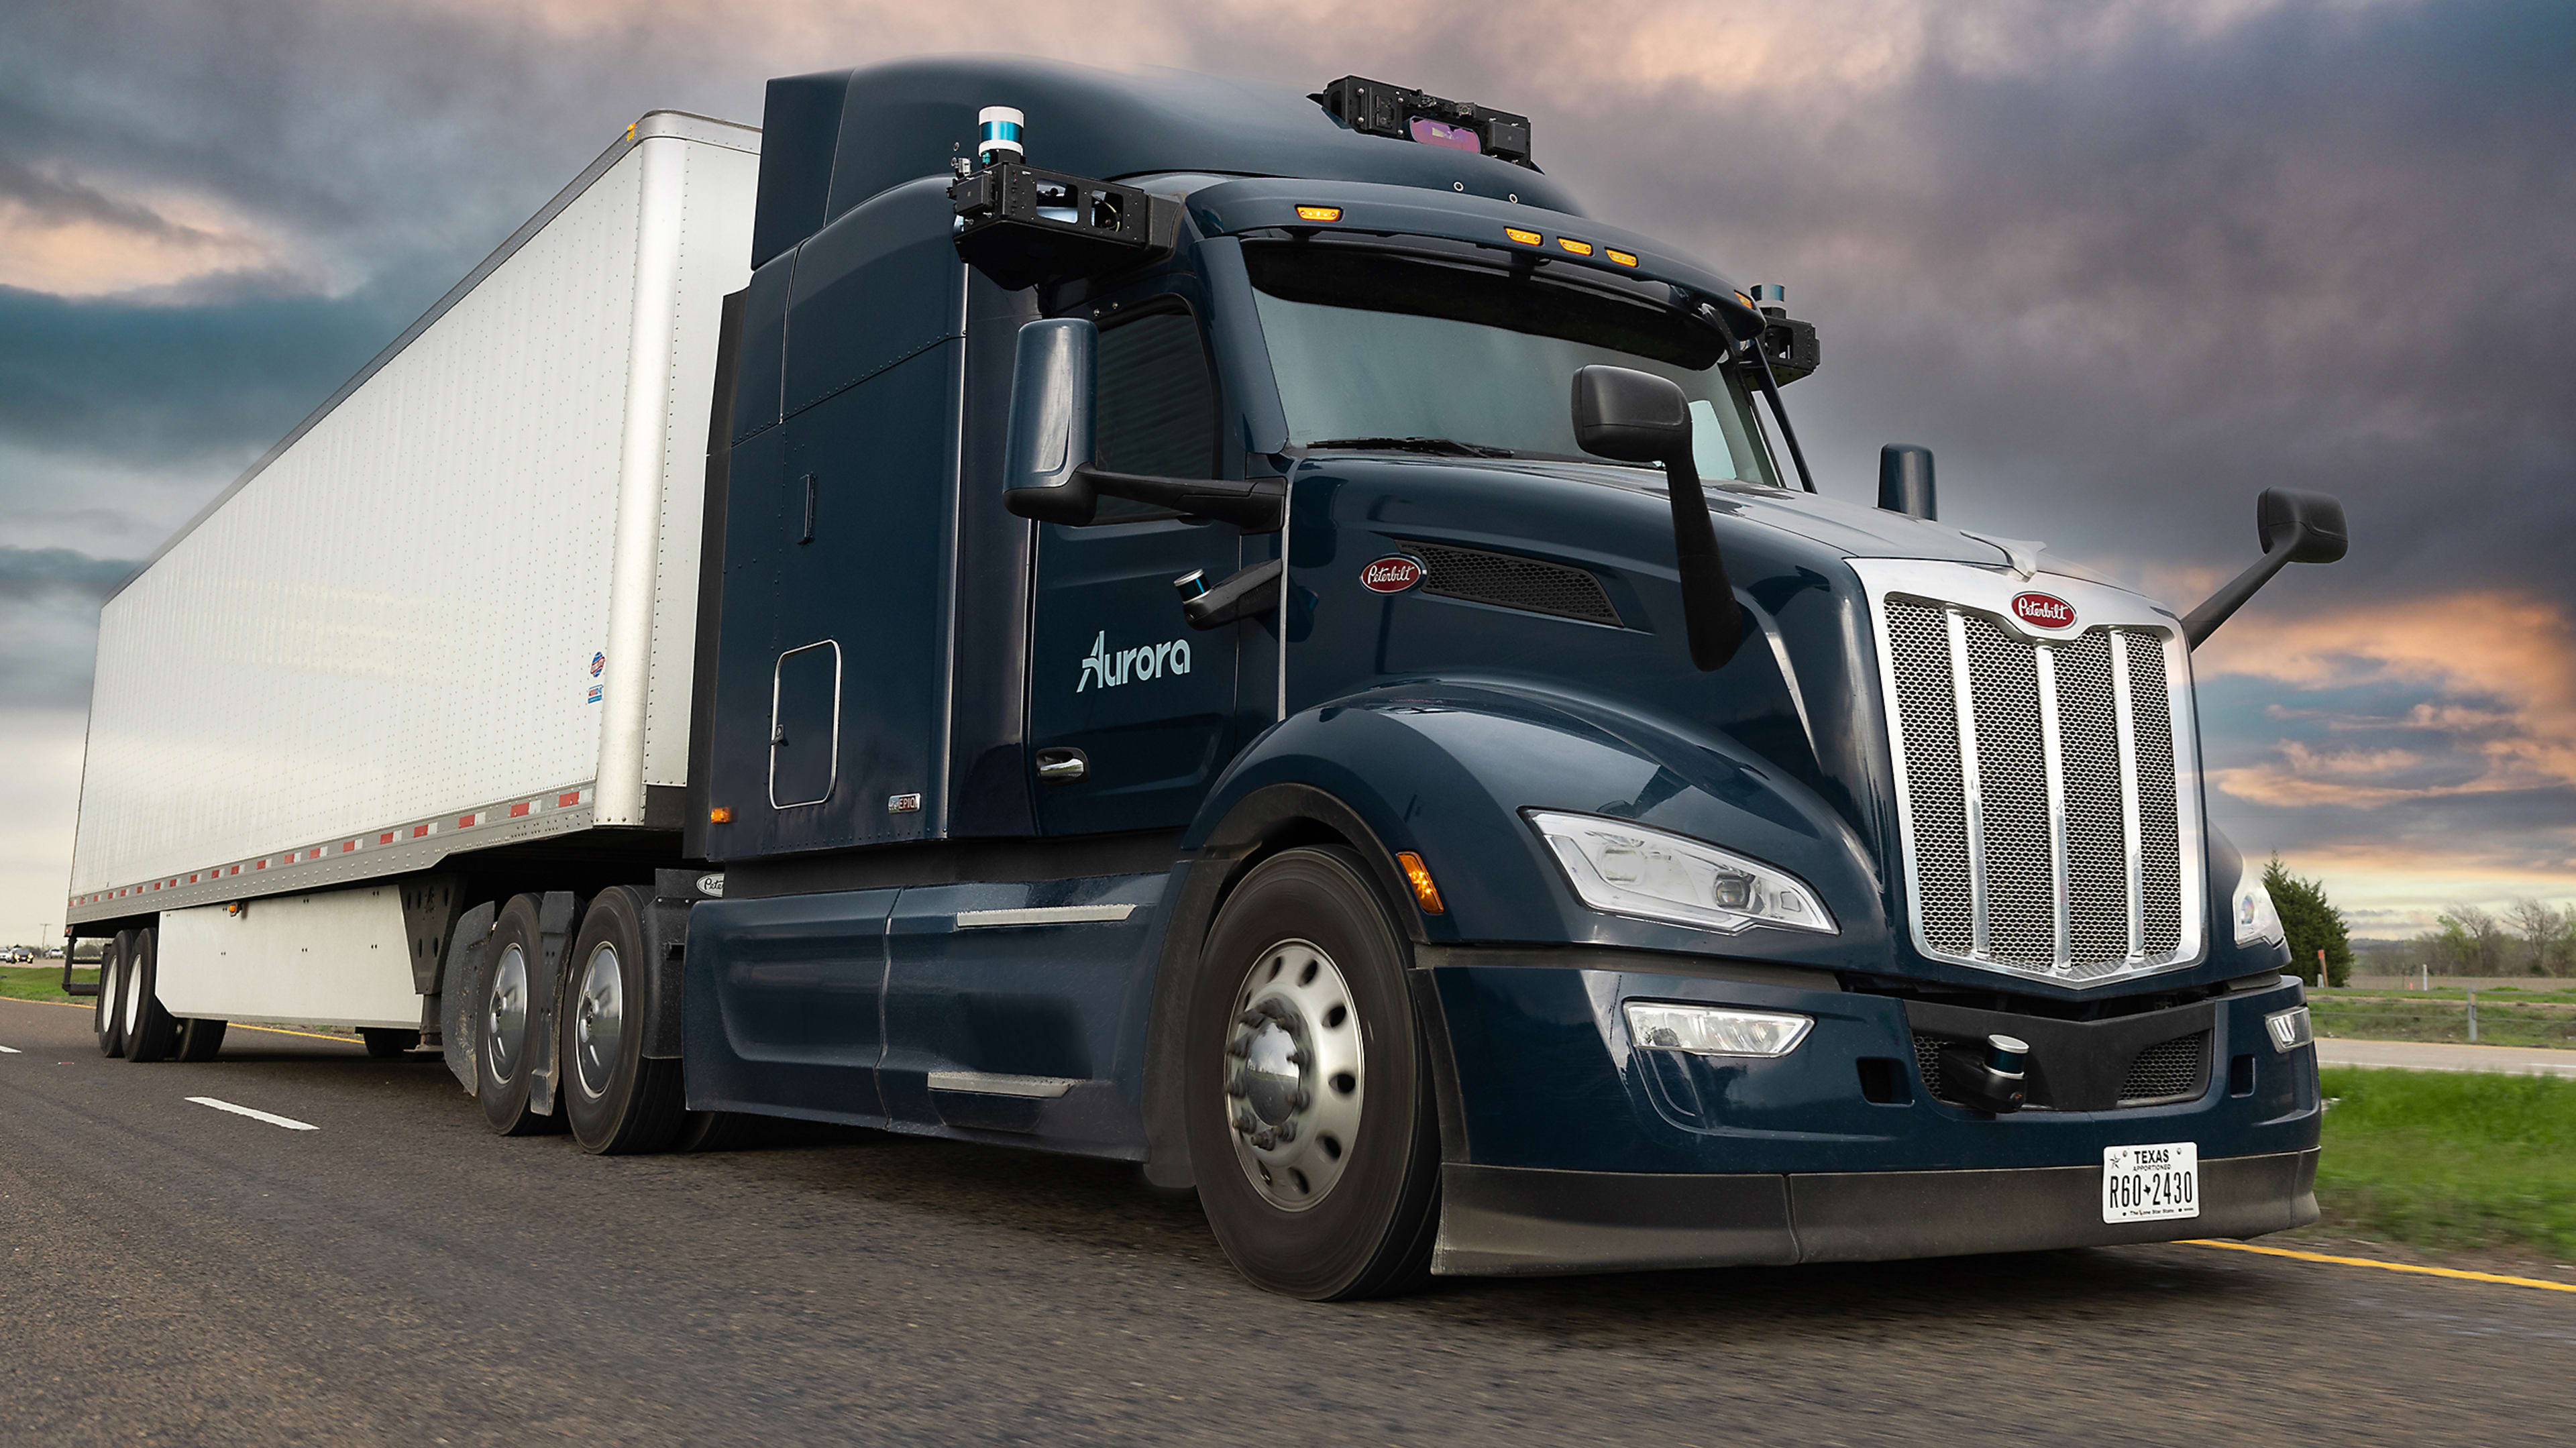 Aurora’s self-driving truck tech is one step closer to hitting the road